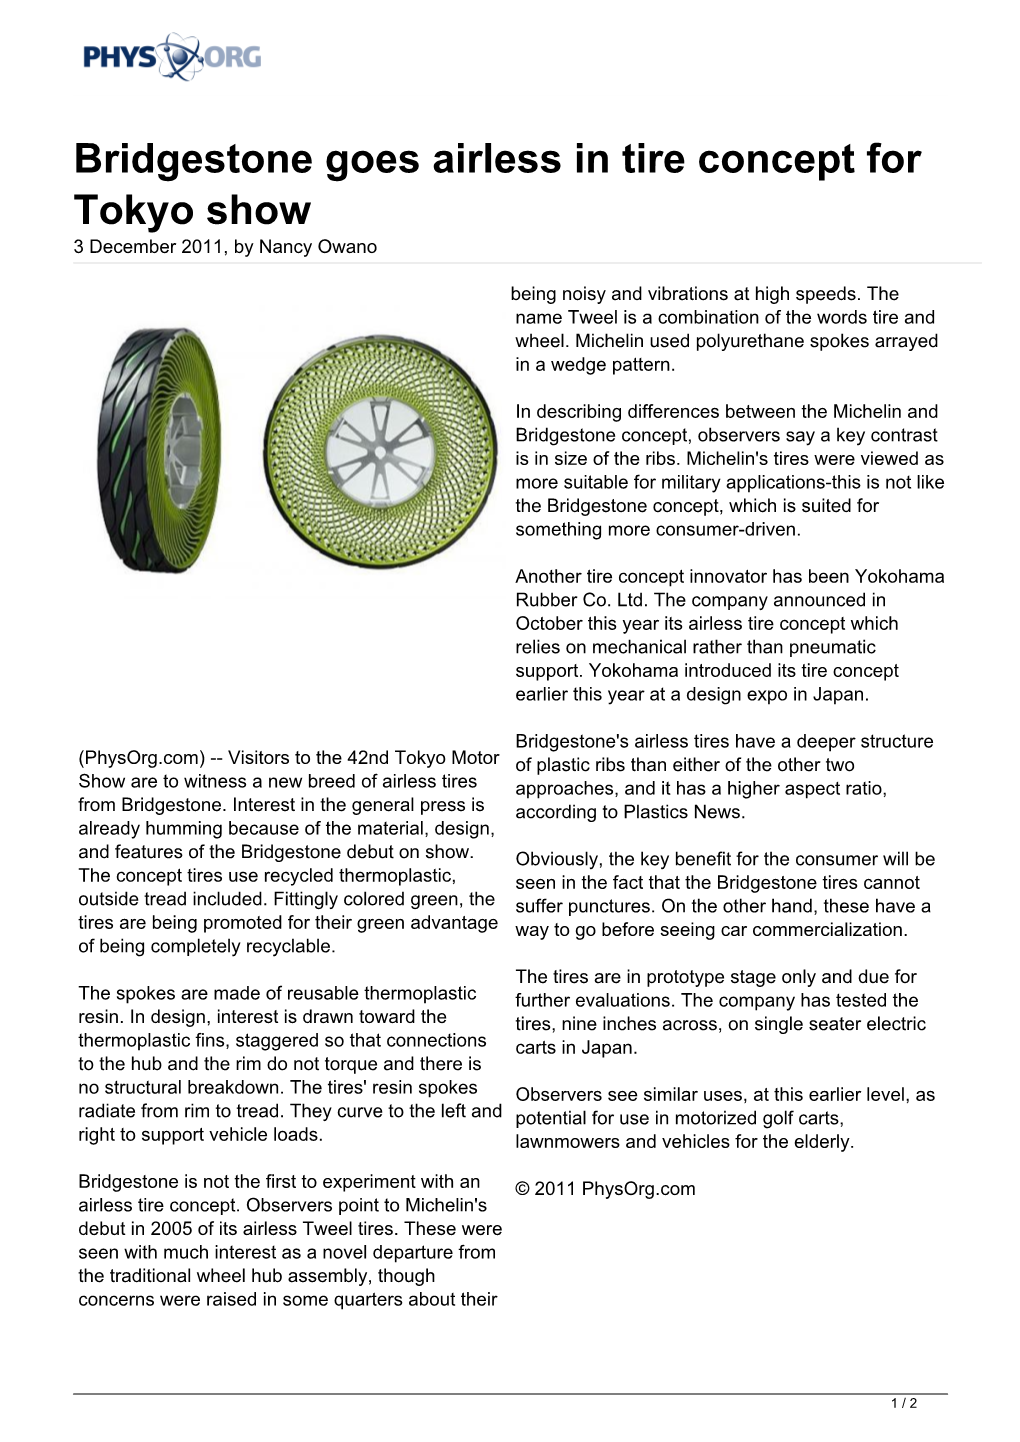 Bridgestone Goes Airless in Tire Concept for Tokyo Show 3 December 2011, by Nancy Owano